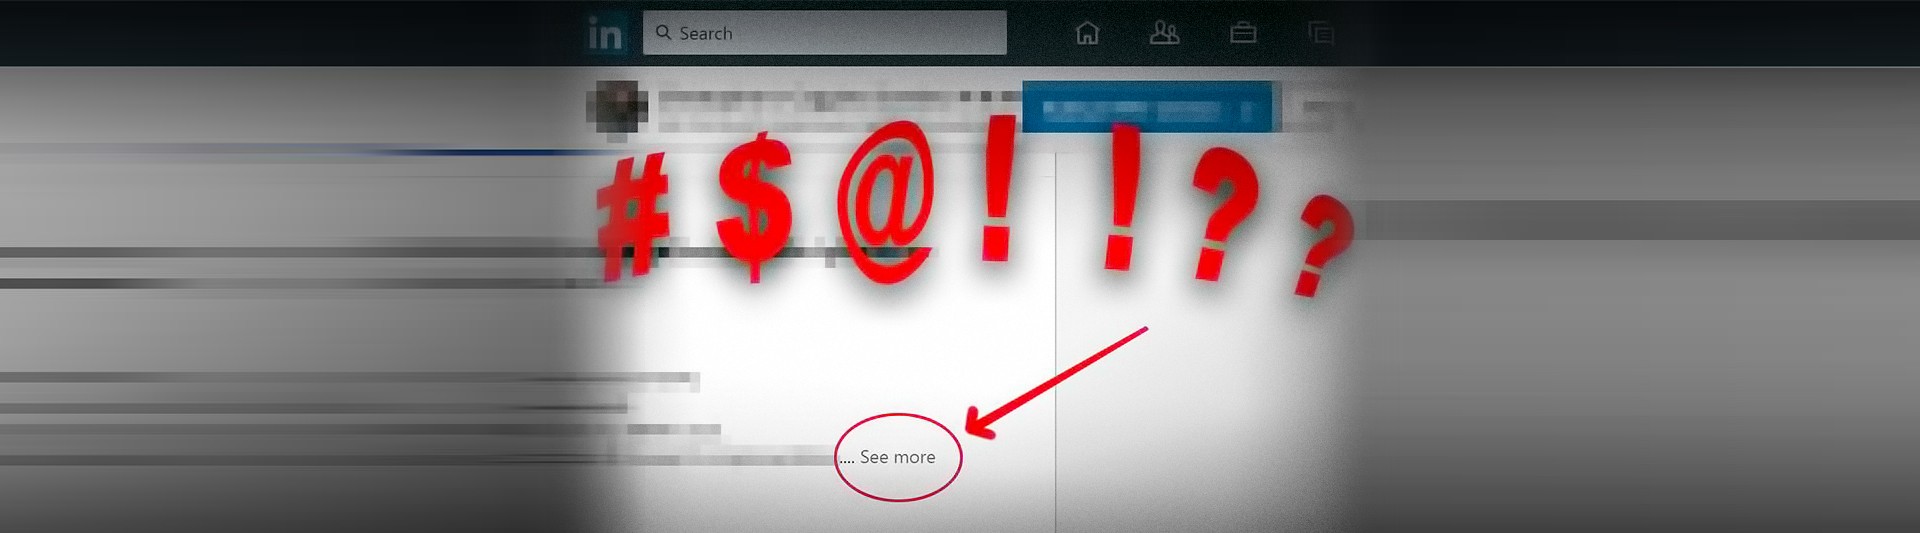 LinkedIn profiles made shorter with a forced 'show more...' link.